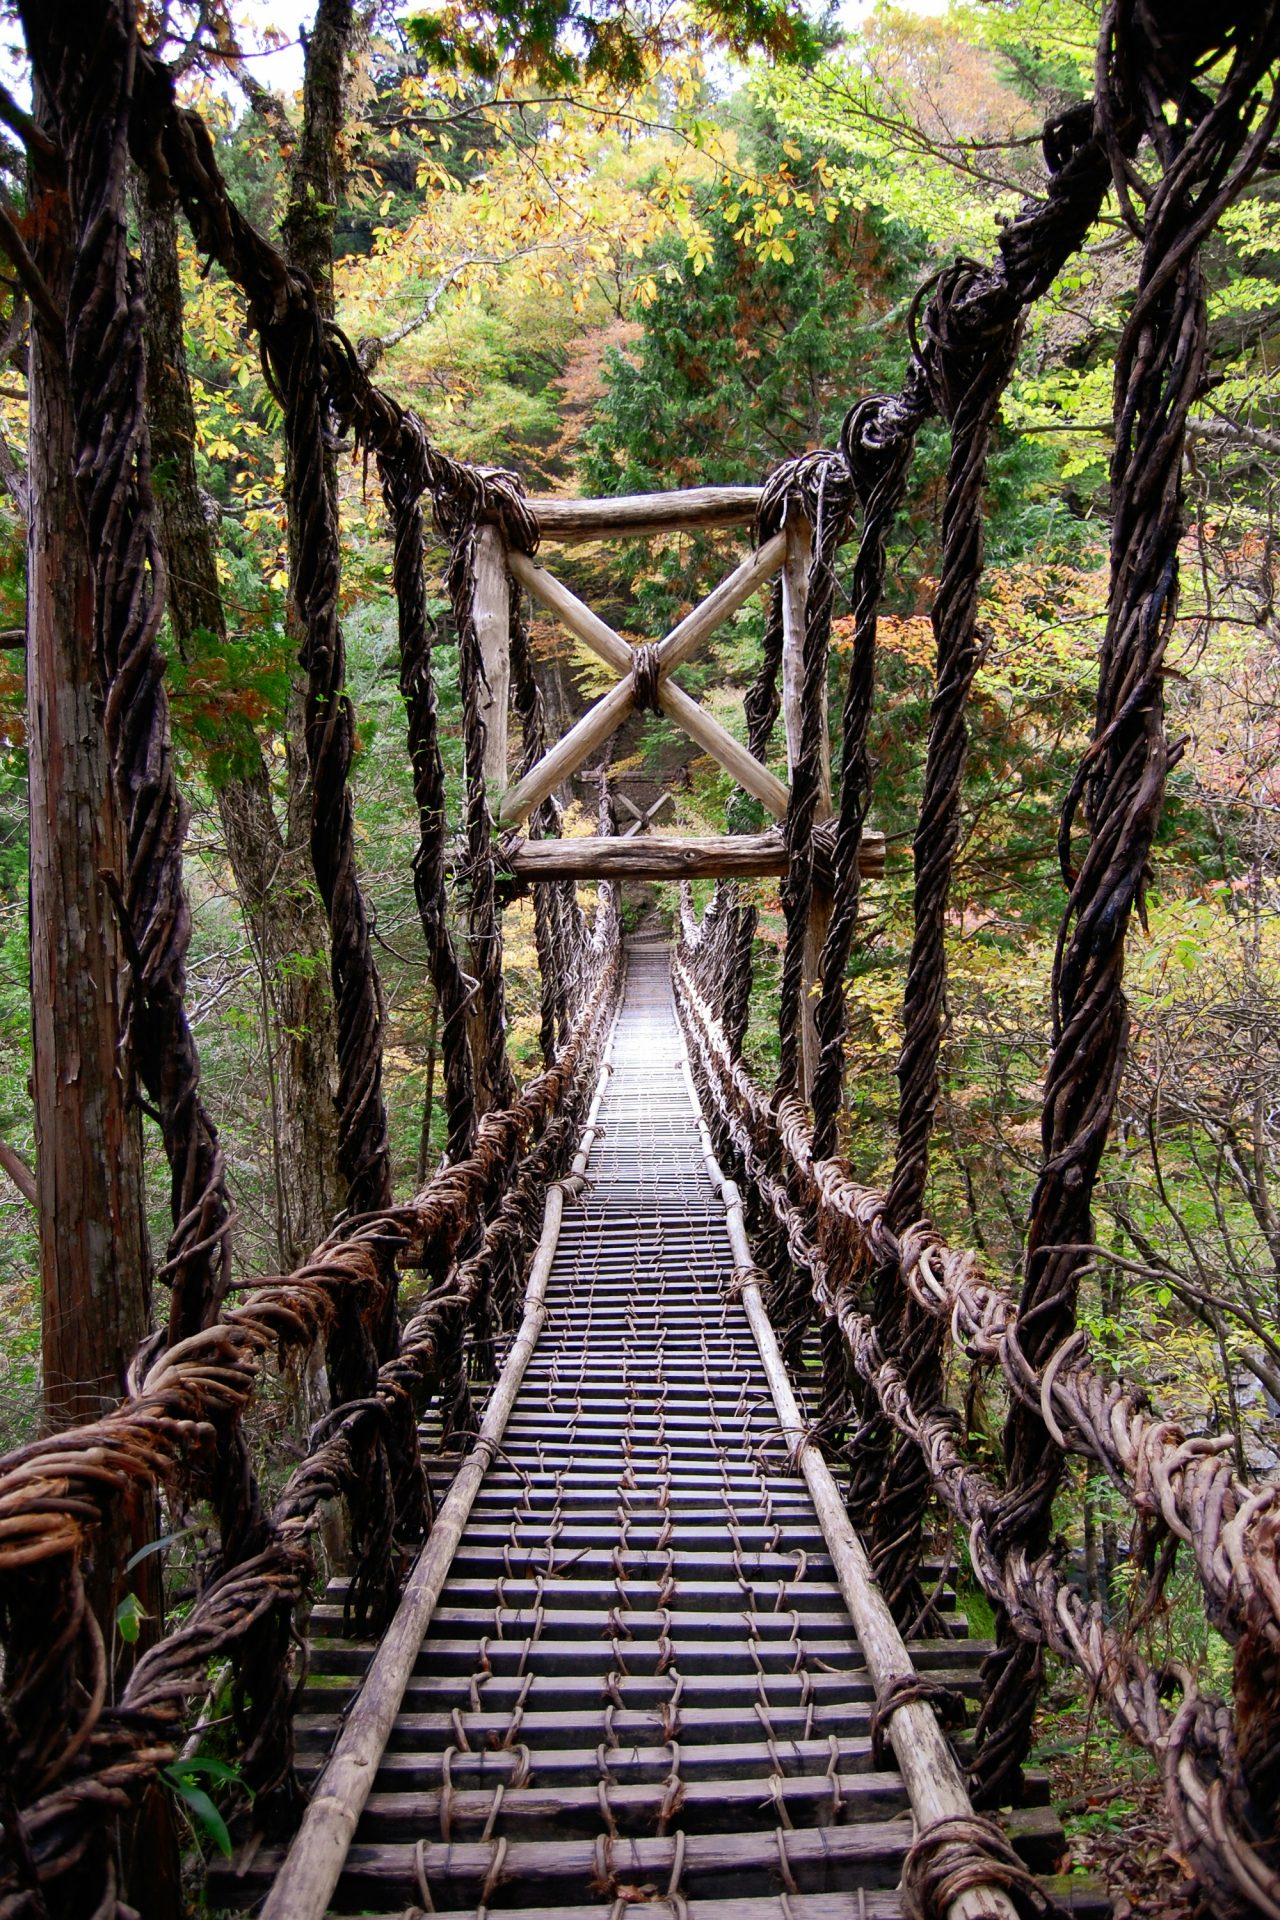 <p>Legend has it that the Heike fugitives who lived in hiding in Iya built this bridge so that they could easily cut it off and escape in case their pursuers approached. It is currently reinforced with wire, but the trees that serve as footholds are wide apart and the bottom of the valley is completely visible. Therefore, it is not recommended for people who are afraid of heights.</p> <p>Image: Susann Schuster / Unsplash</p>